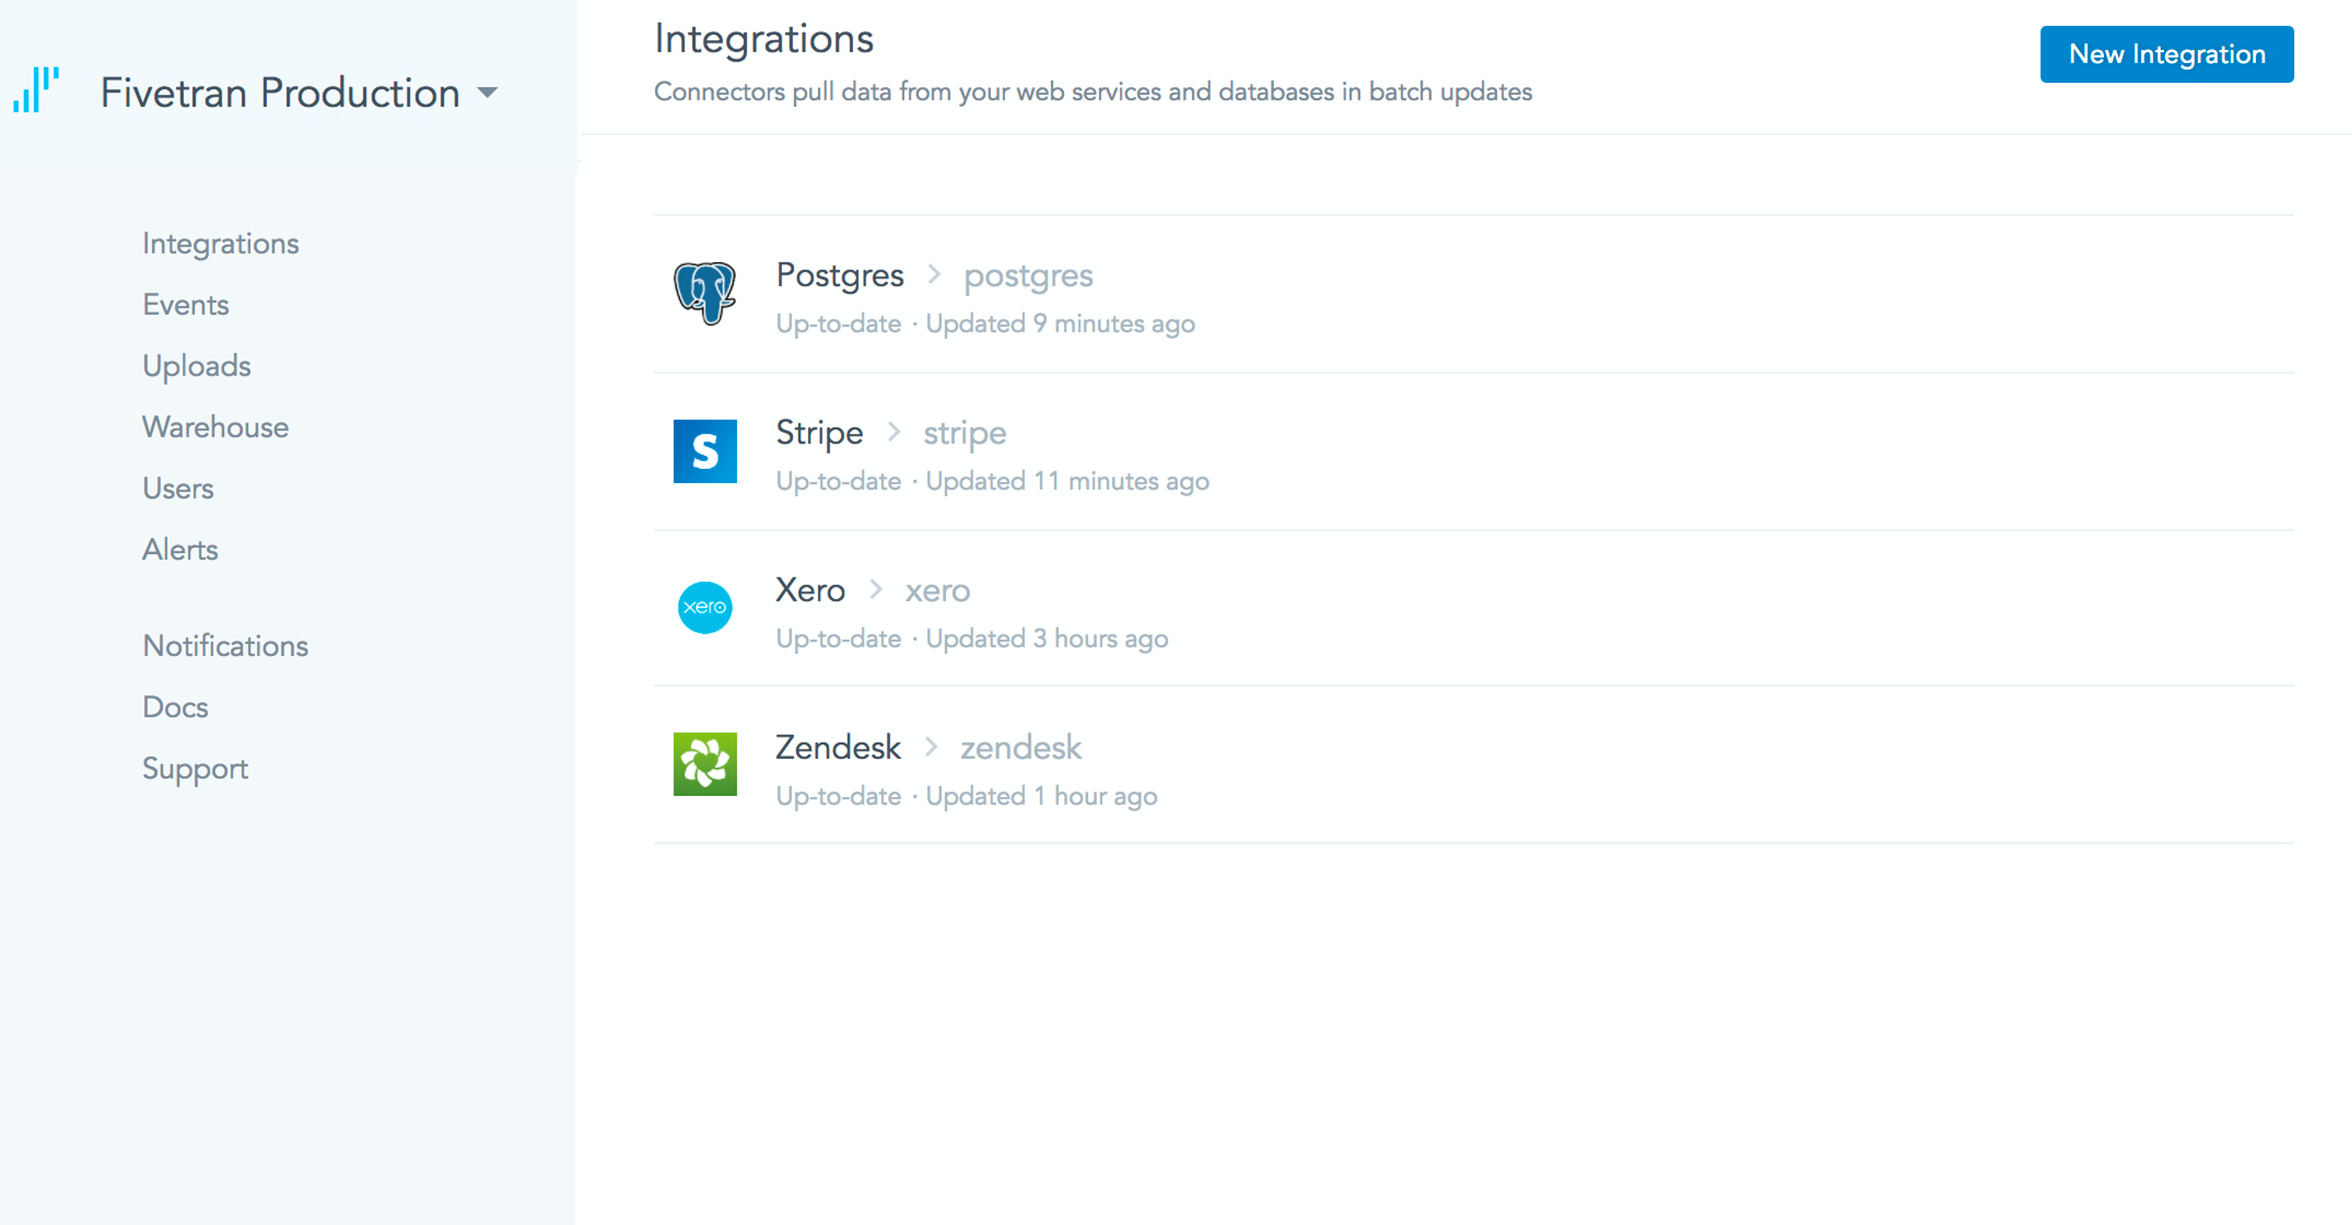 Fivetran Software - Fivetran supports integrations with Postgres, Stripe, Xero, & Zendesk, allowing users to pull data from their web service & databases in batch updates